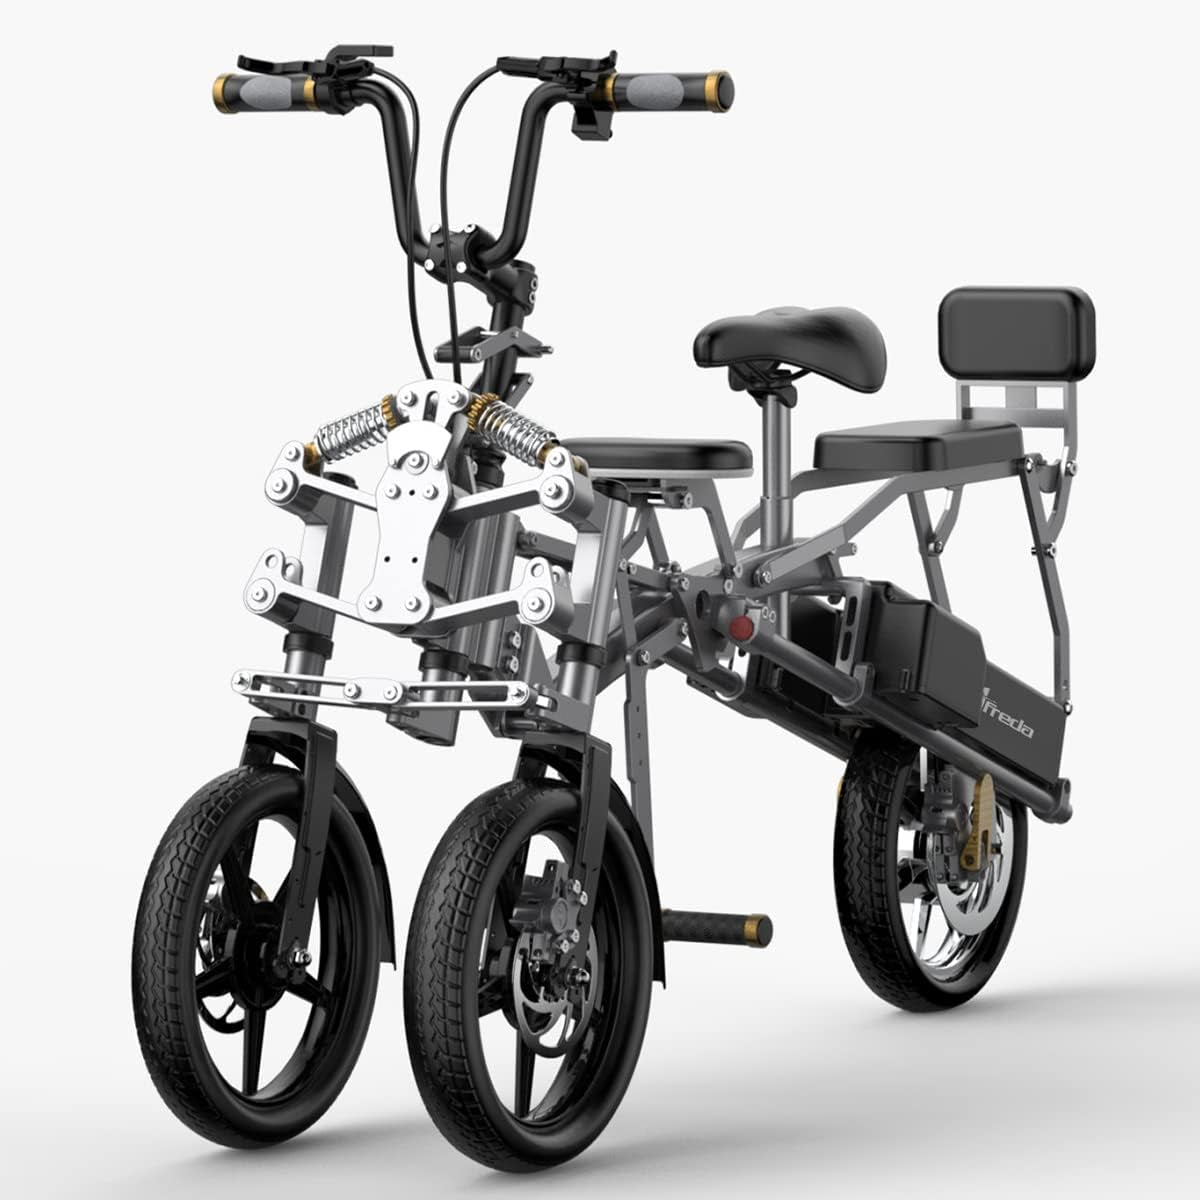 Official S6 Electric Tricycle Bike Ultra Safety Compact Folding 3 Wheel Fold-In-1S Reverse 3-Wheel E-Bike 48V 500W 15.6AH 14'' Hydraulic Brake Shock